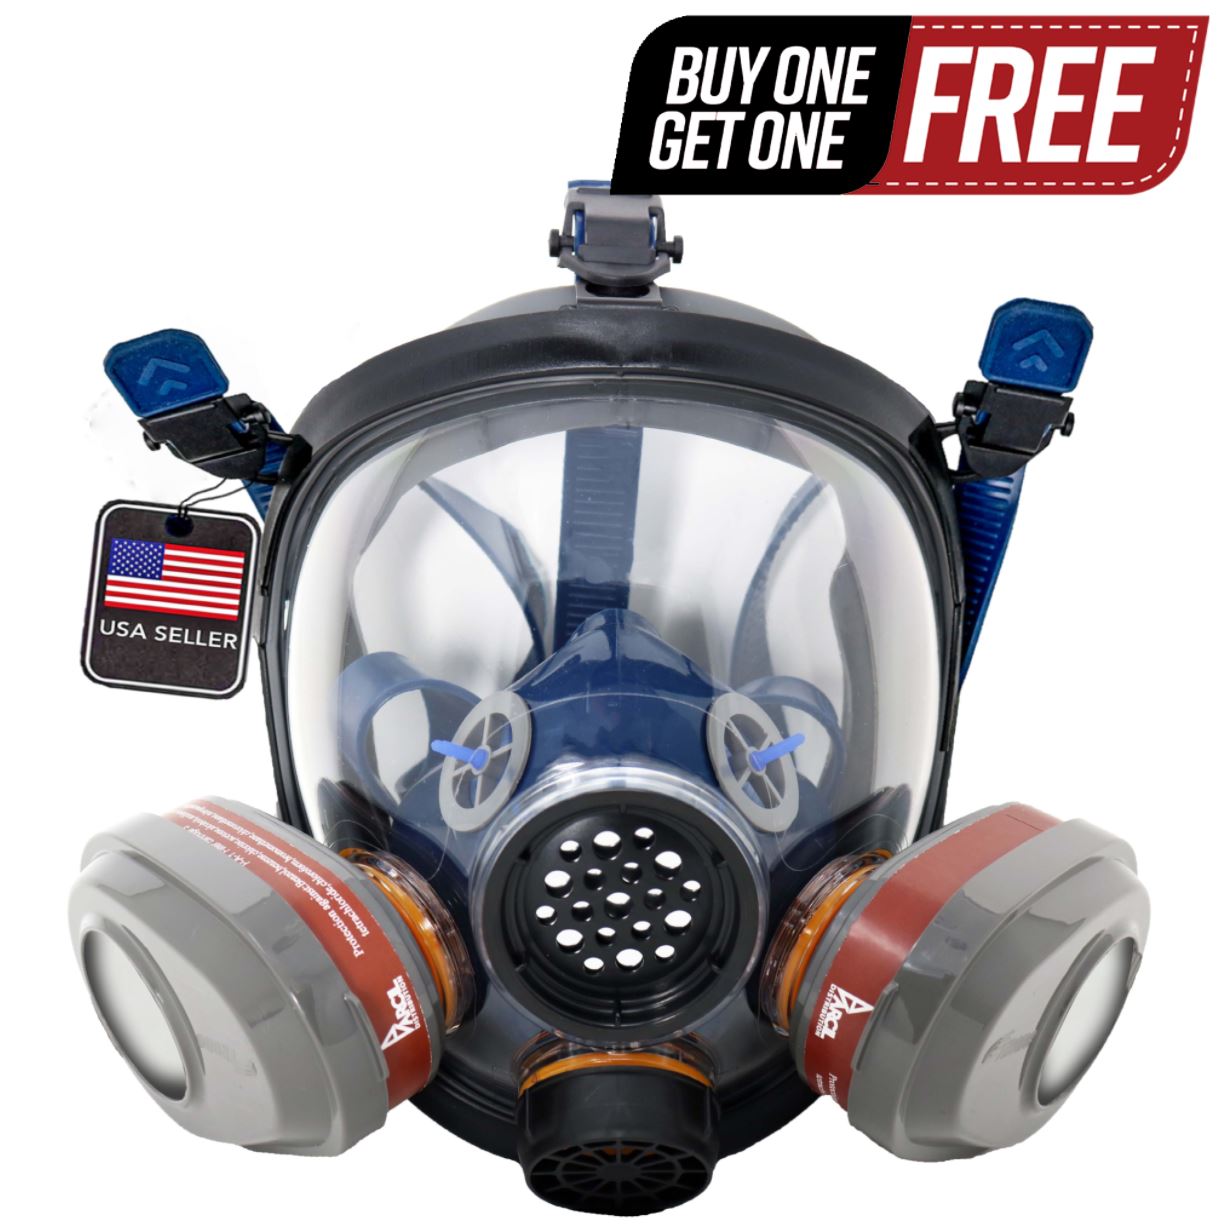 Parcil Safety: BOGO PD-101 Full Face Respirator Gas Mask with Organic Vapor and Particulate Filtration $99.97